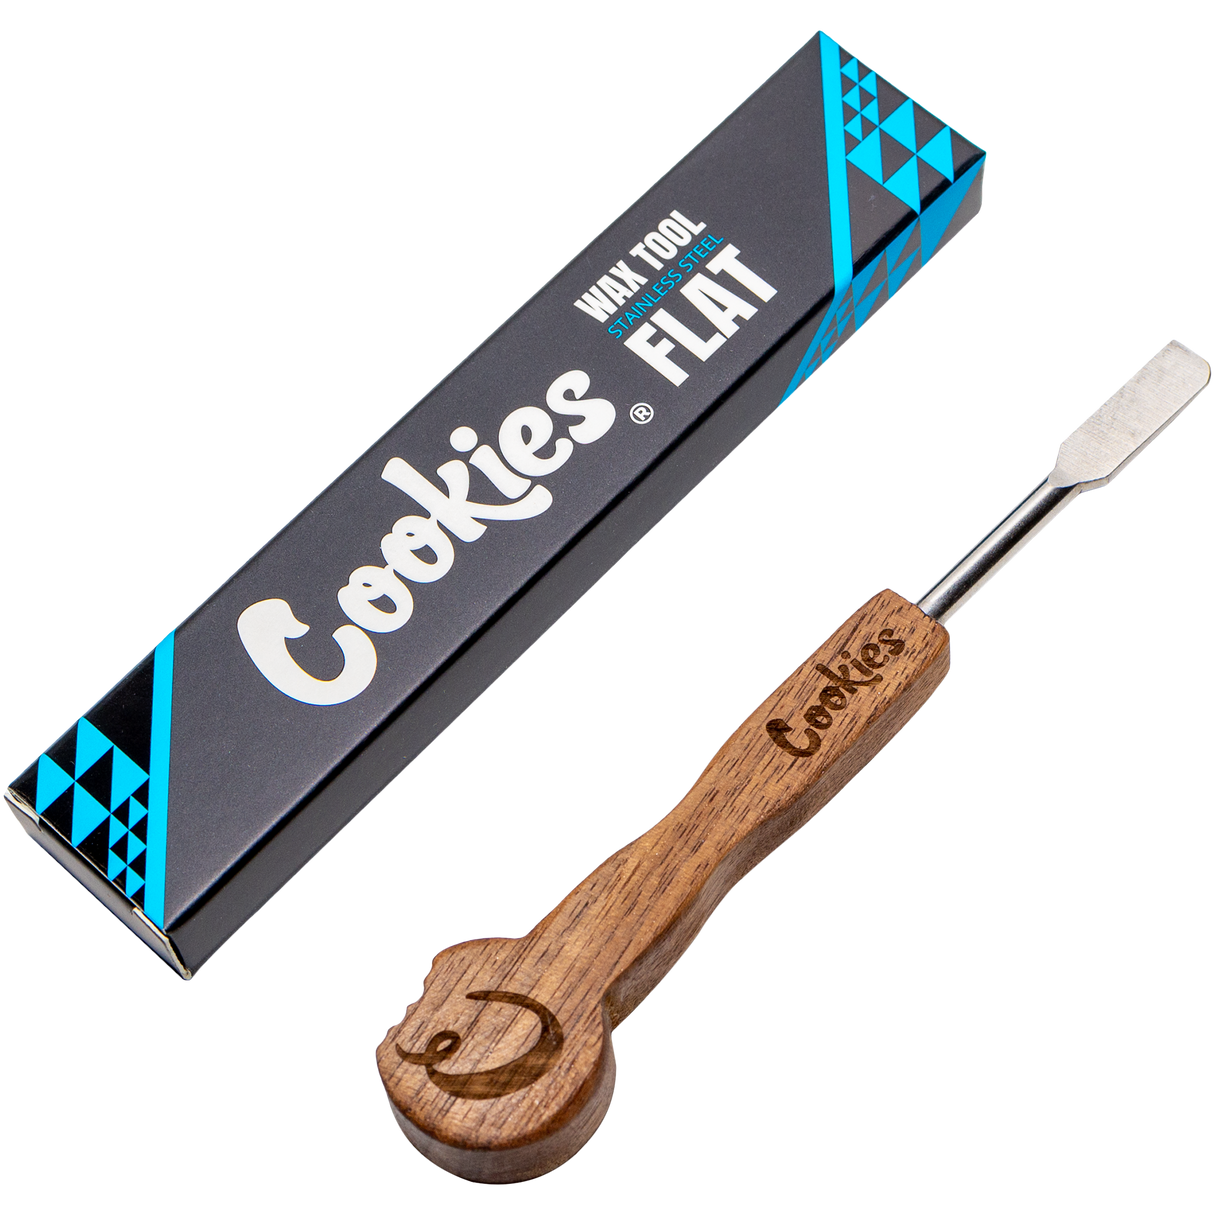 Cookies Wax Tool SS Flat with Wooden Handle and Steel Tip - Angled View with Packaging